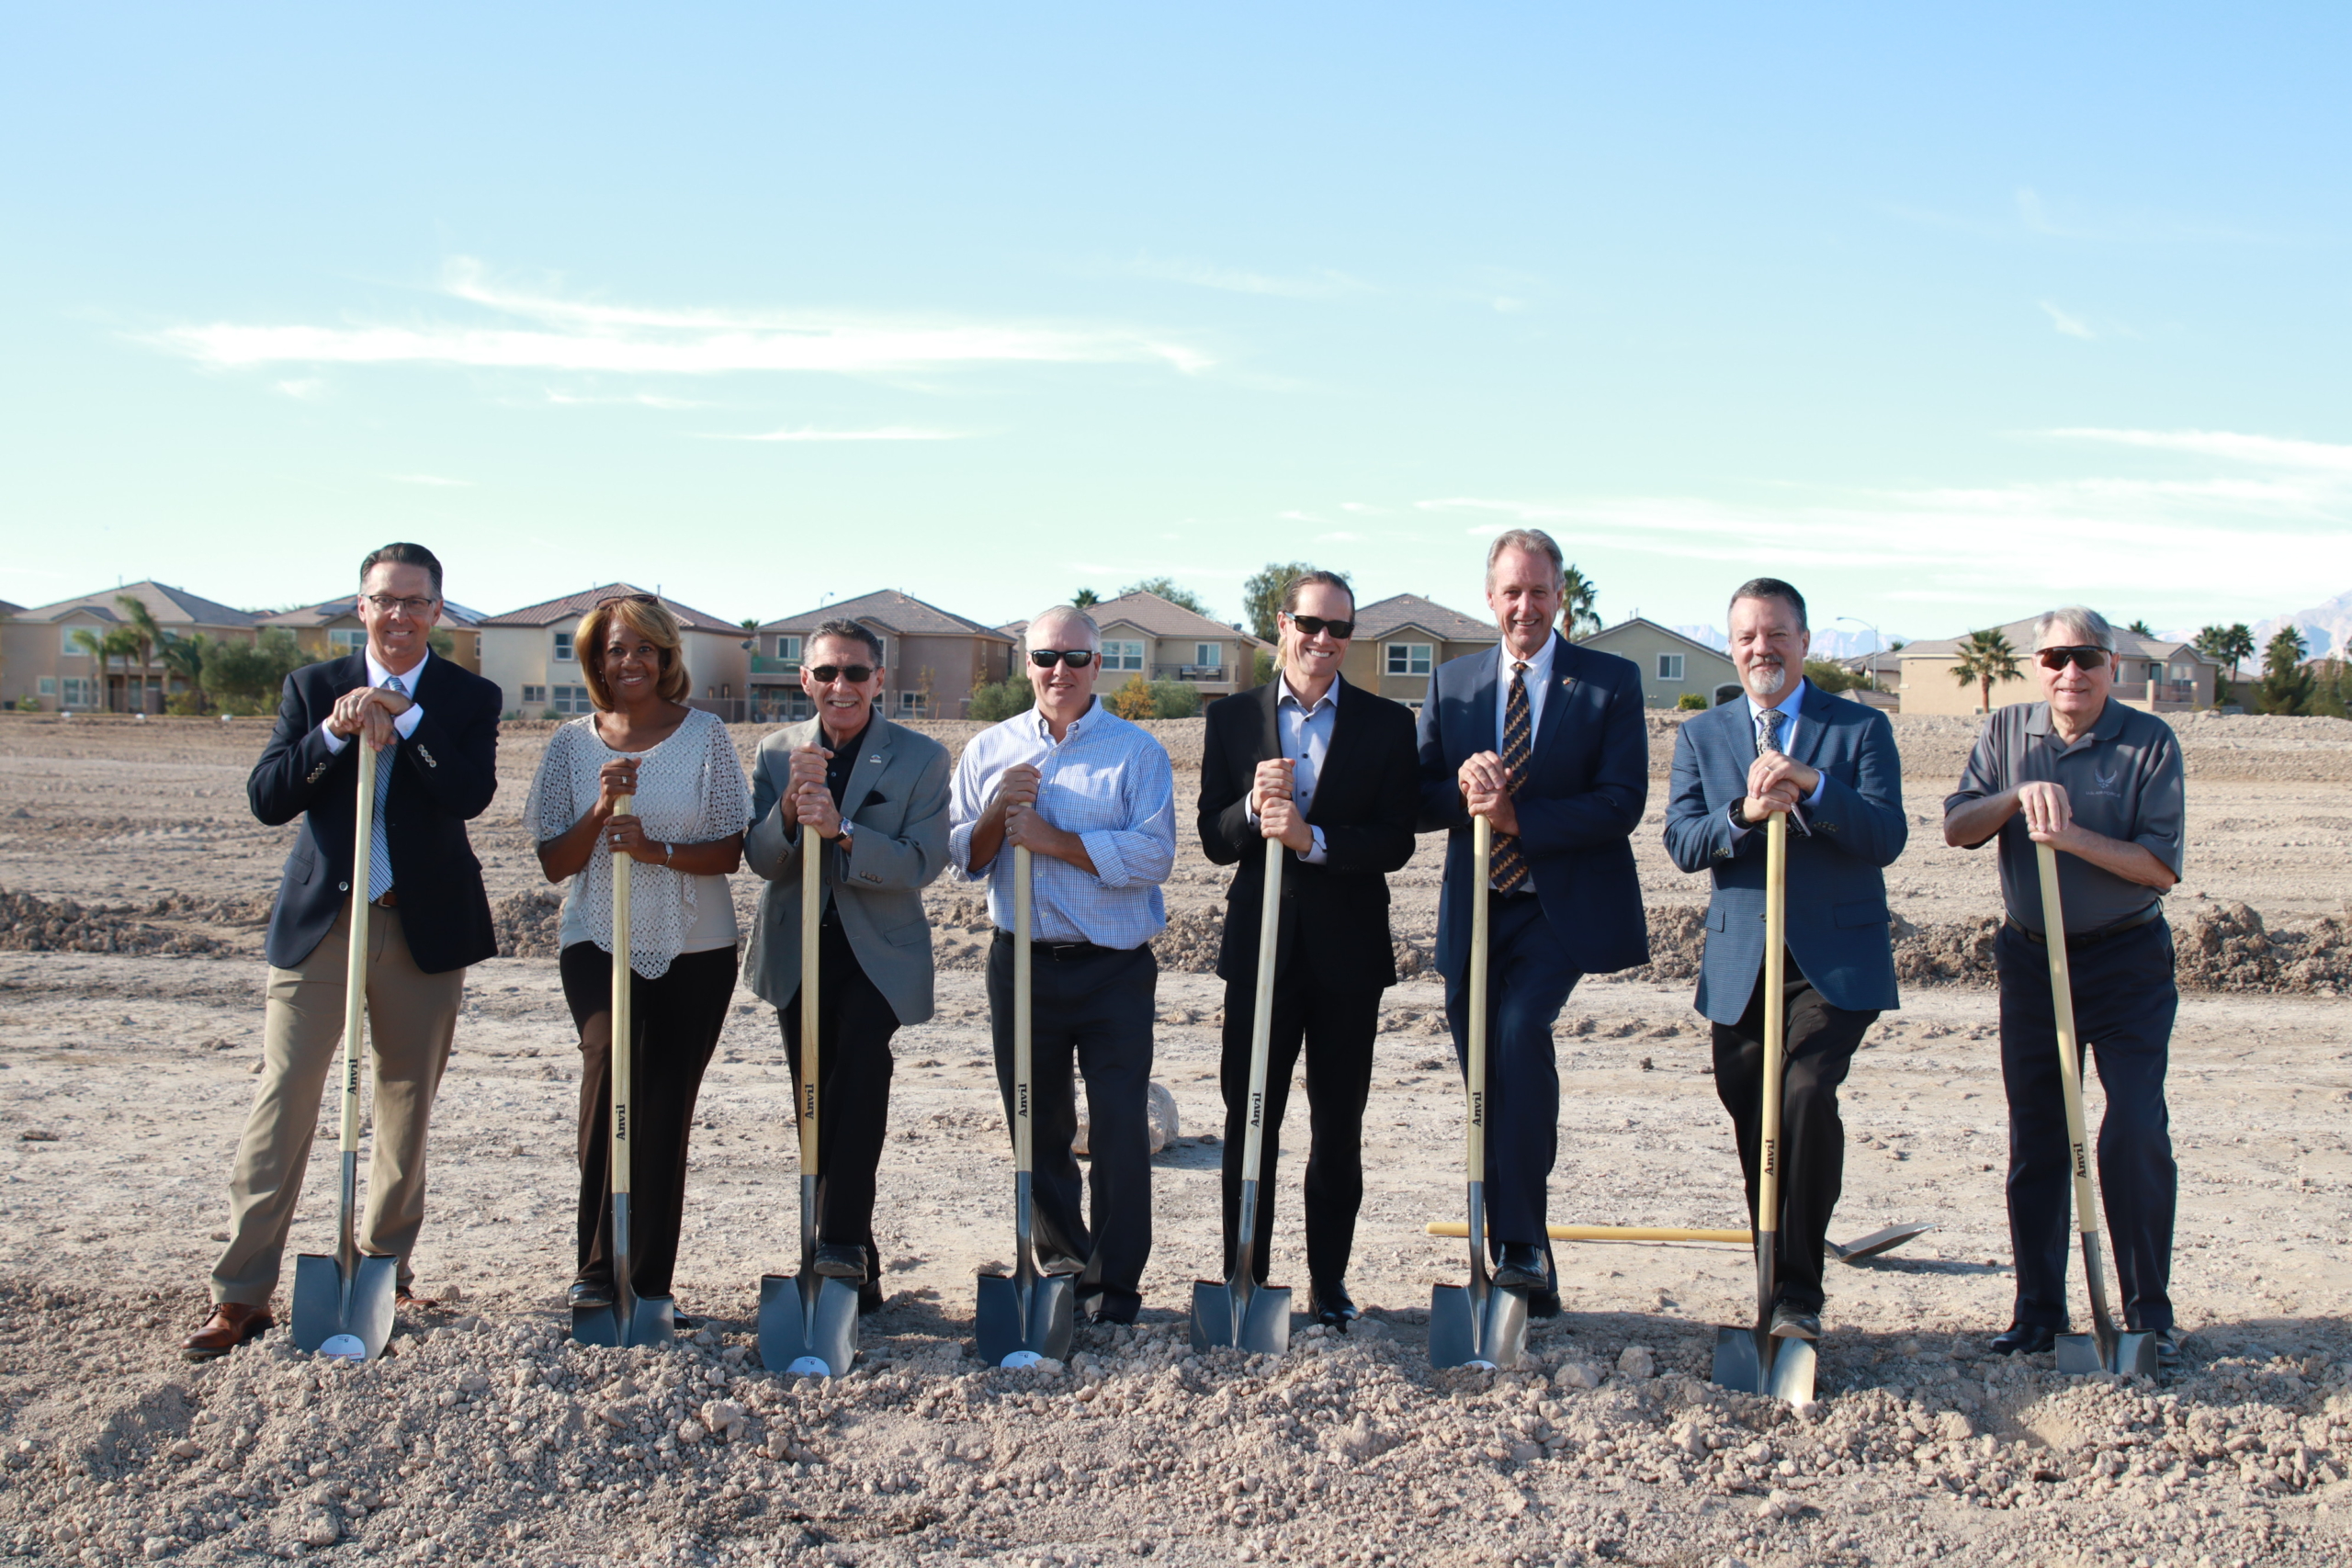 Local dignitaries and developers gathered for the groundbreaking for the Sync, a luxury apartment community in North Las Vegas.